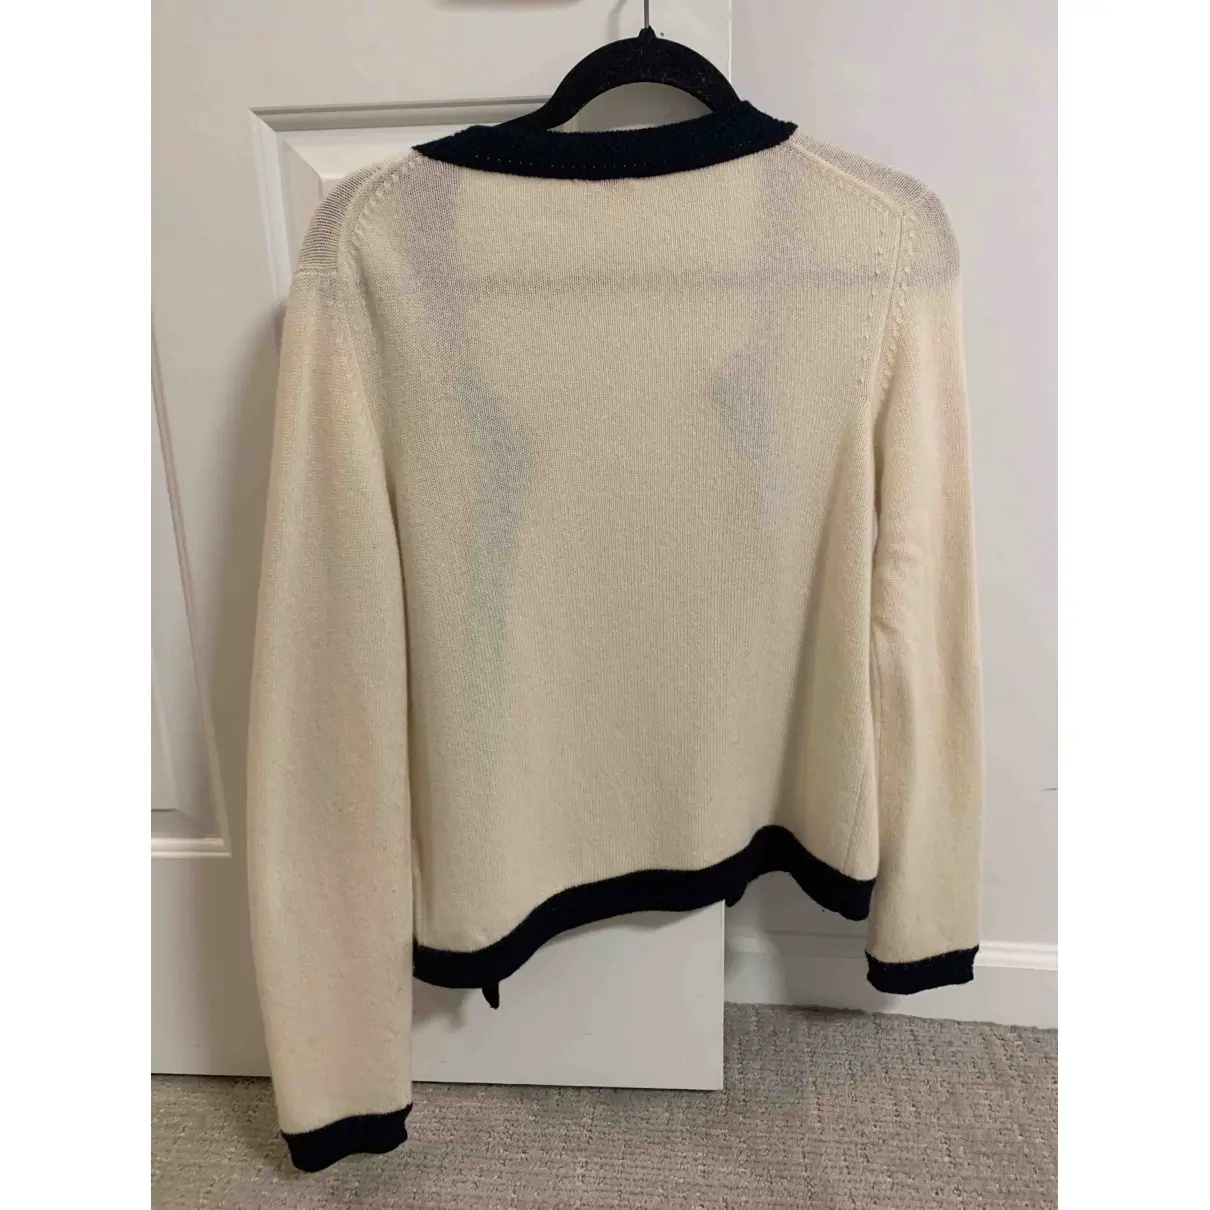 Chanel Wool cardigan for sale - Vintage